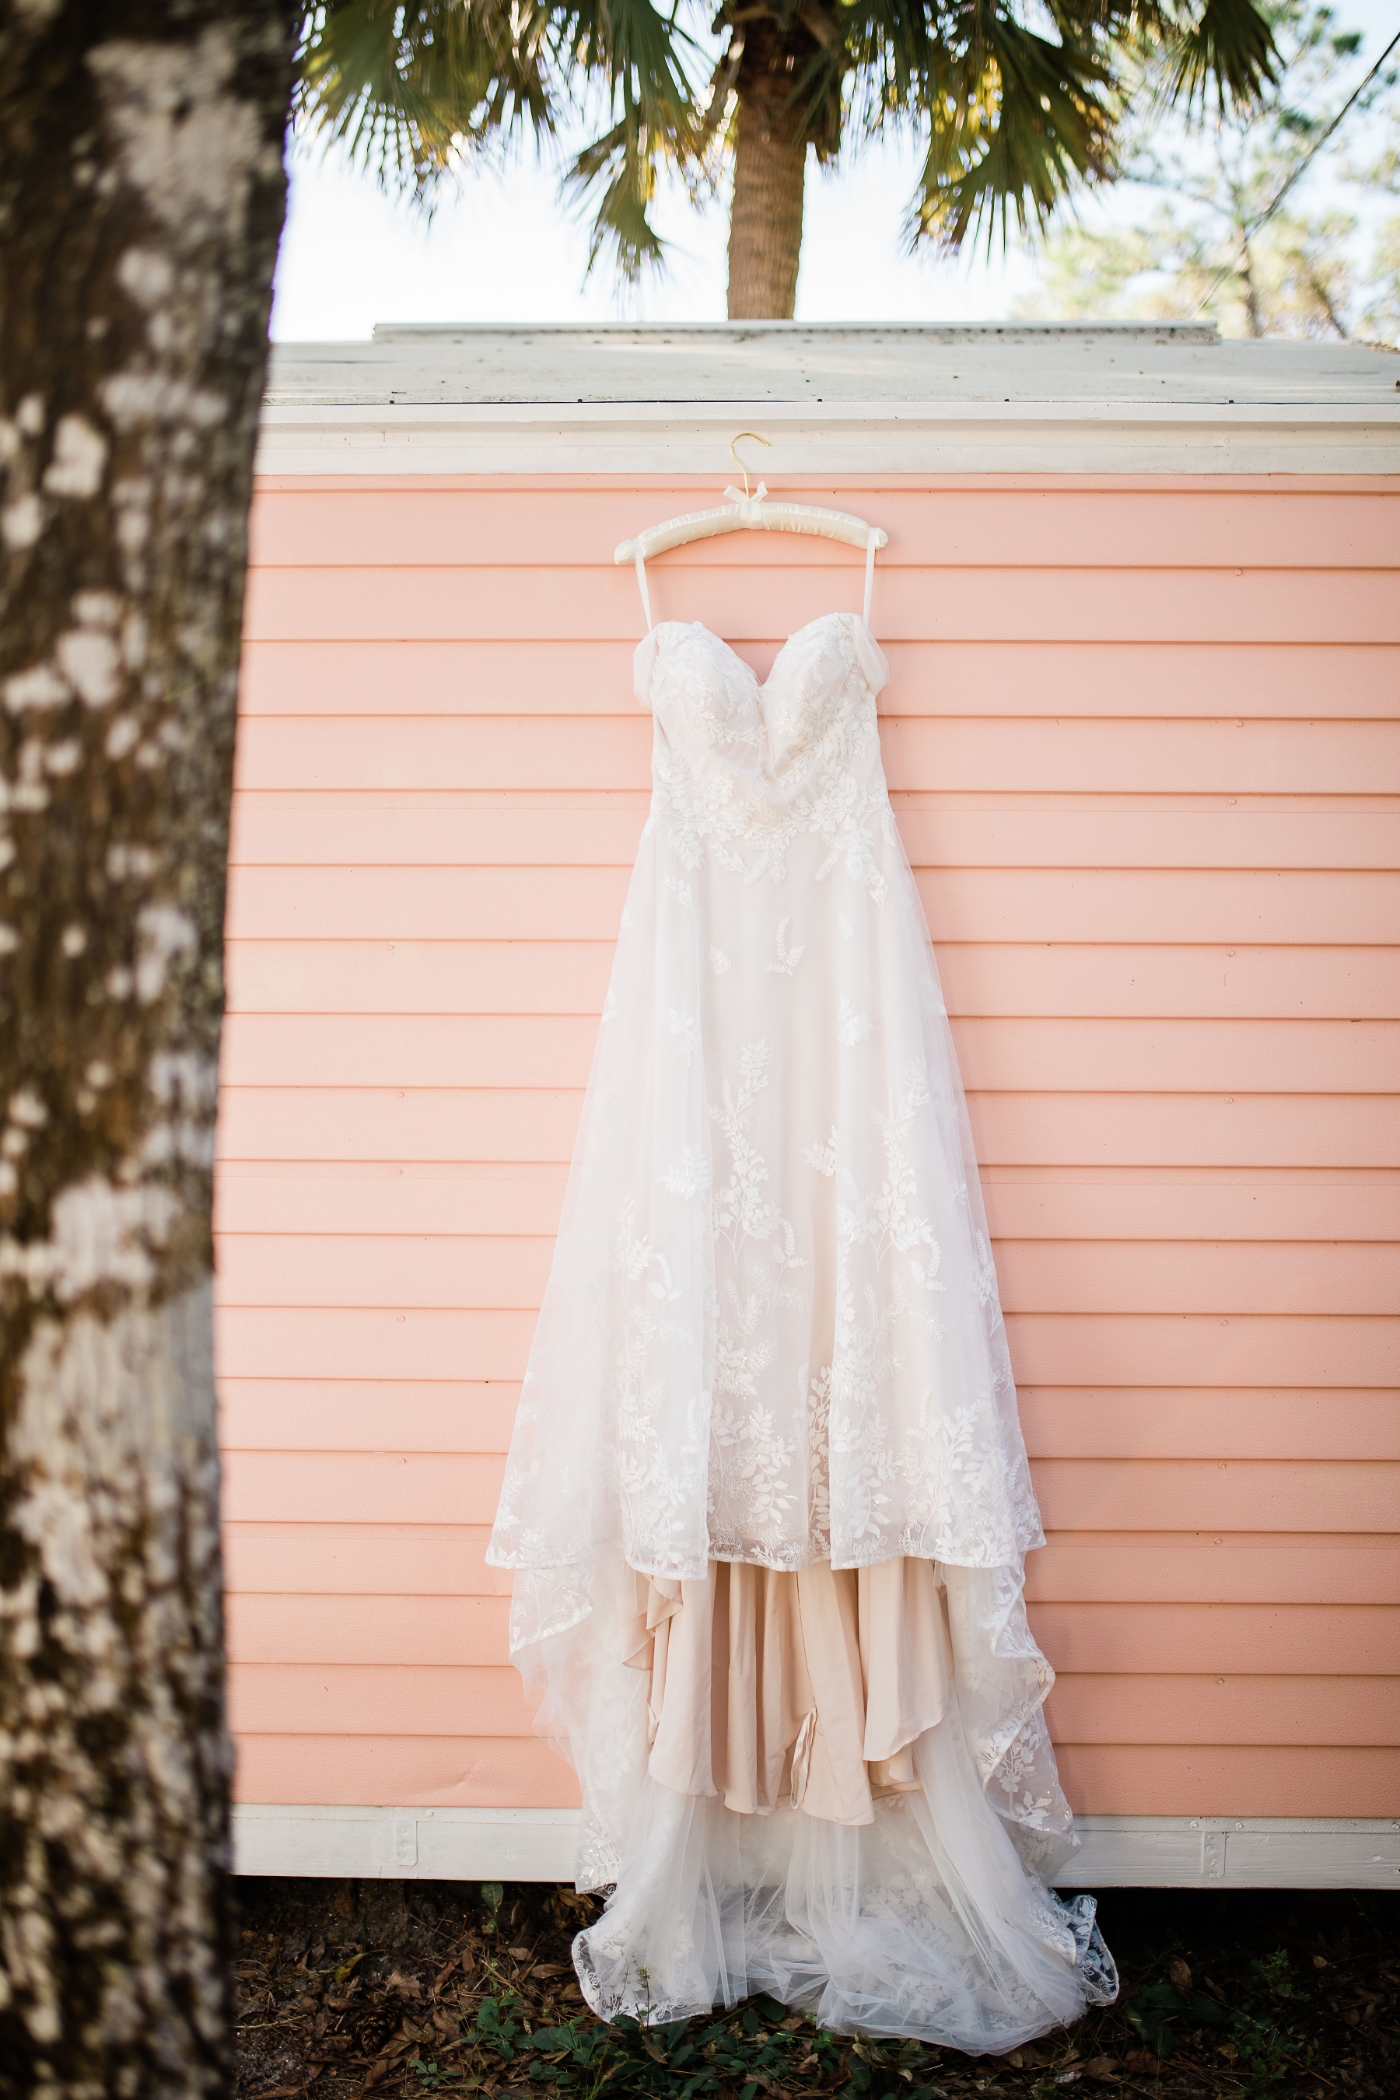 Mae's wedding dress hanging on the side of the pink shed, so beautiful!